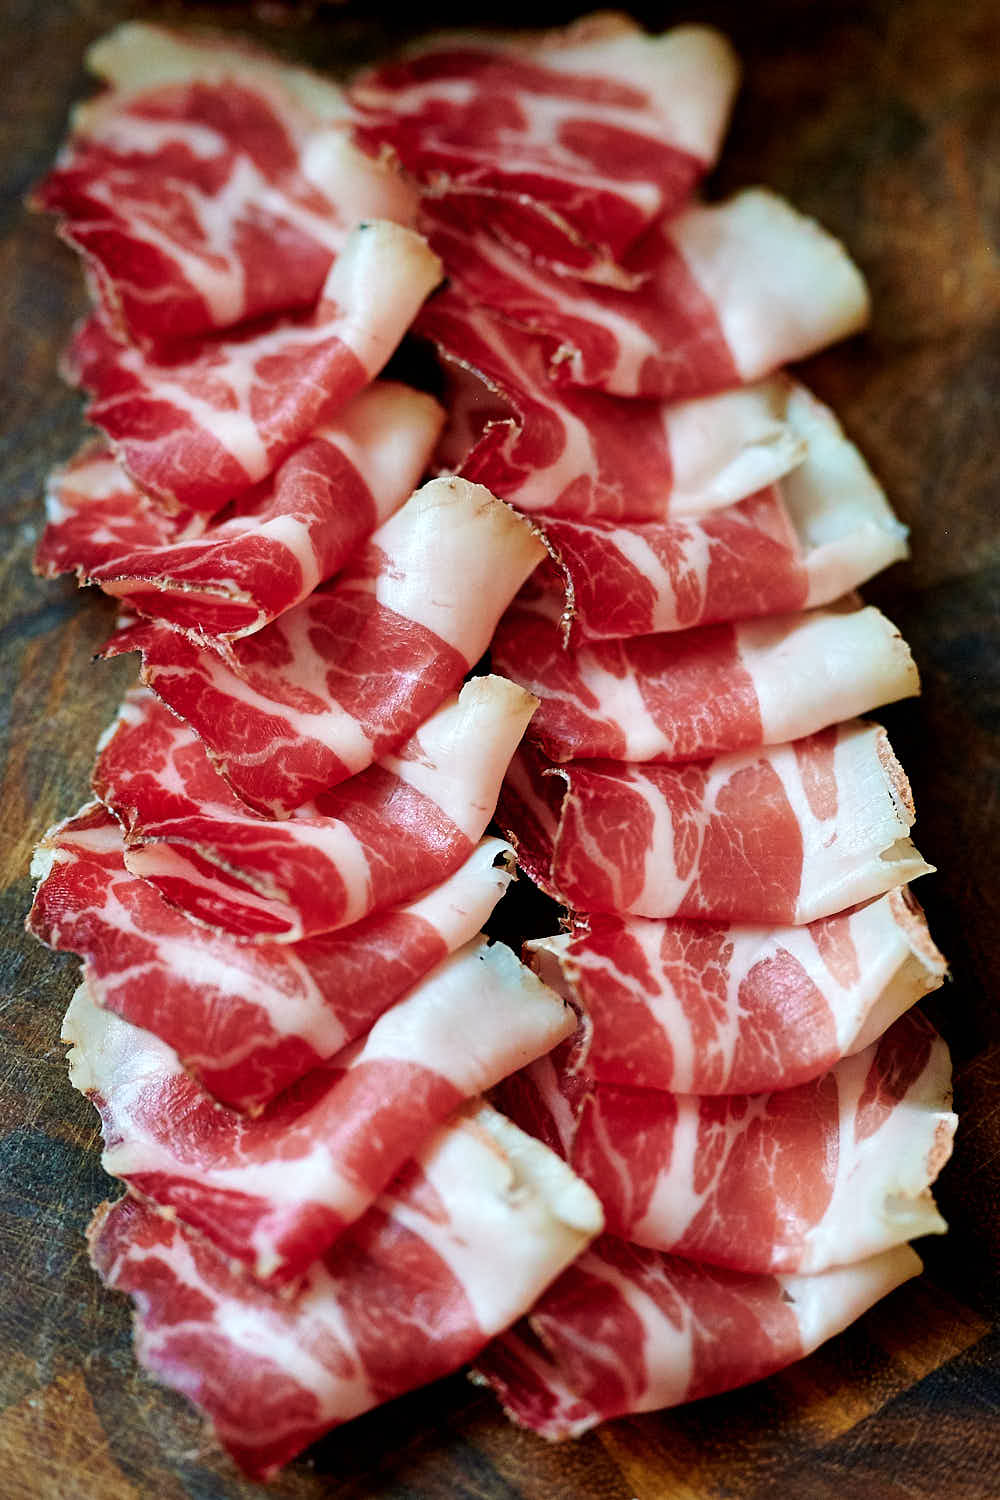 Thinly sliced capicola on a wooden board.